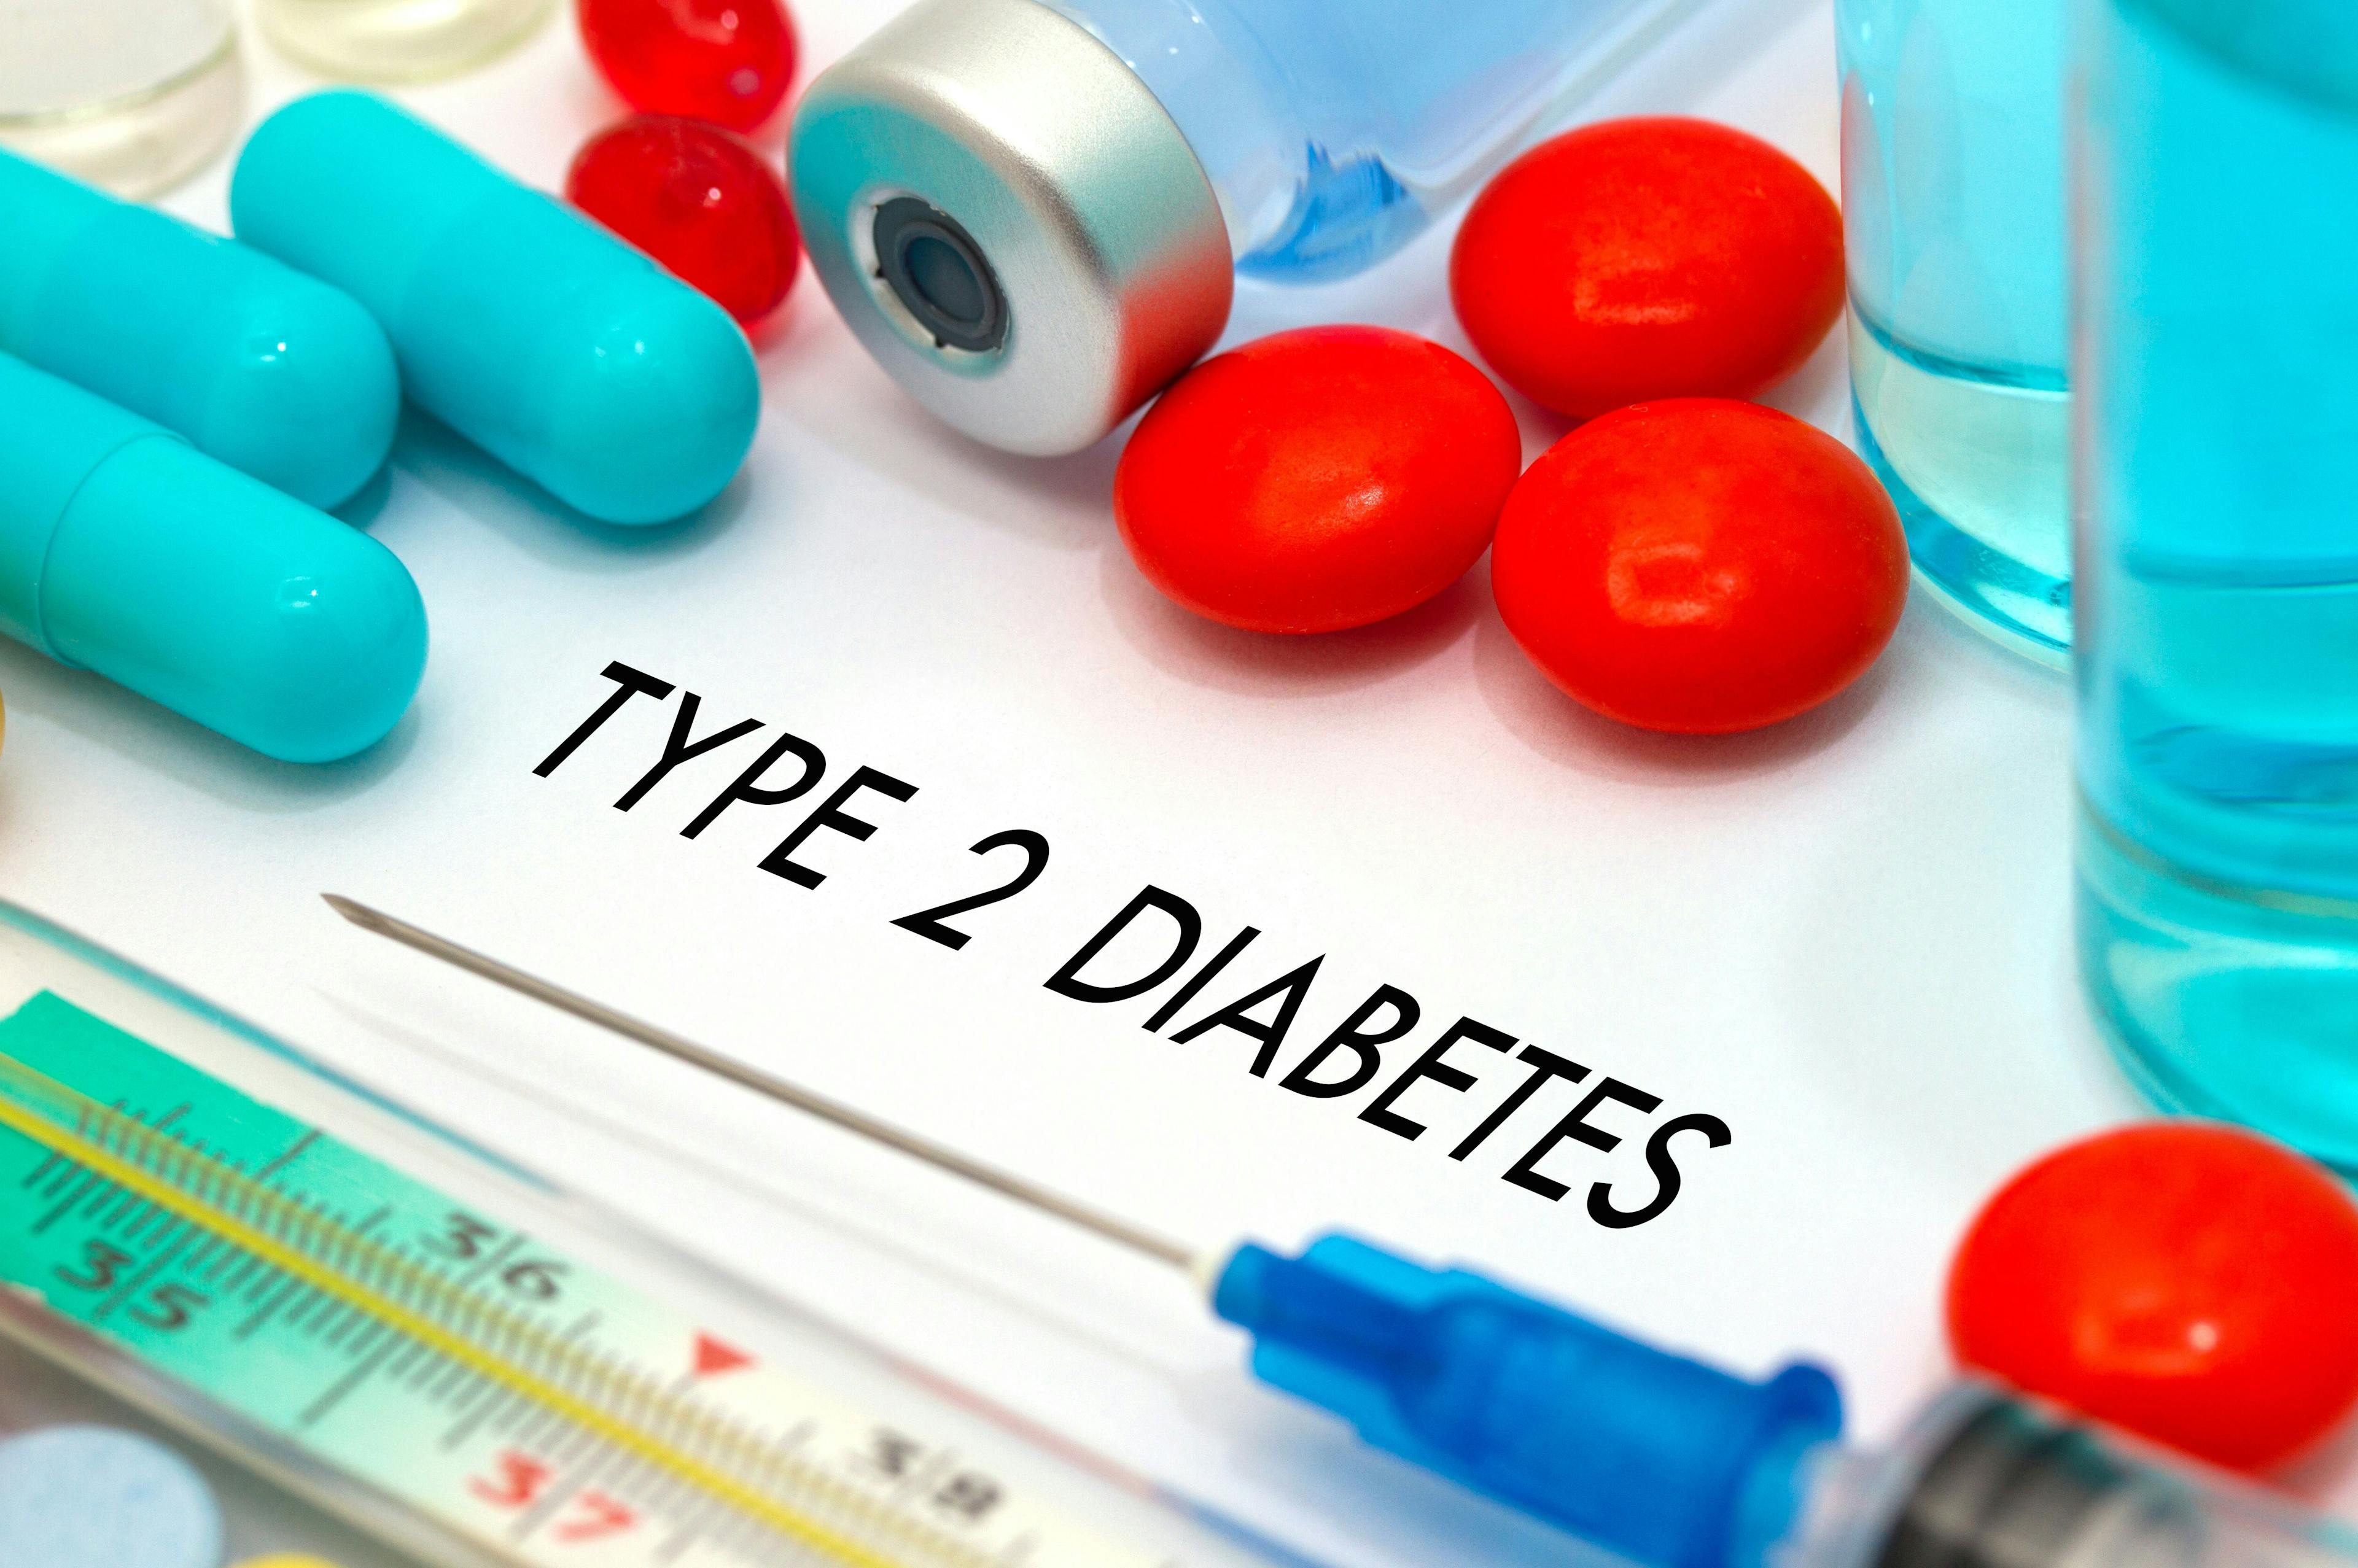 Diabetes was the eighth leading cause of death in the United States in 2021 / greenapple78 - stock.adobe.com